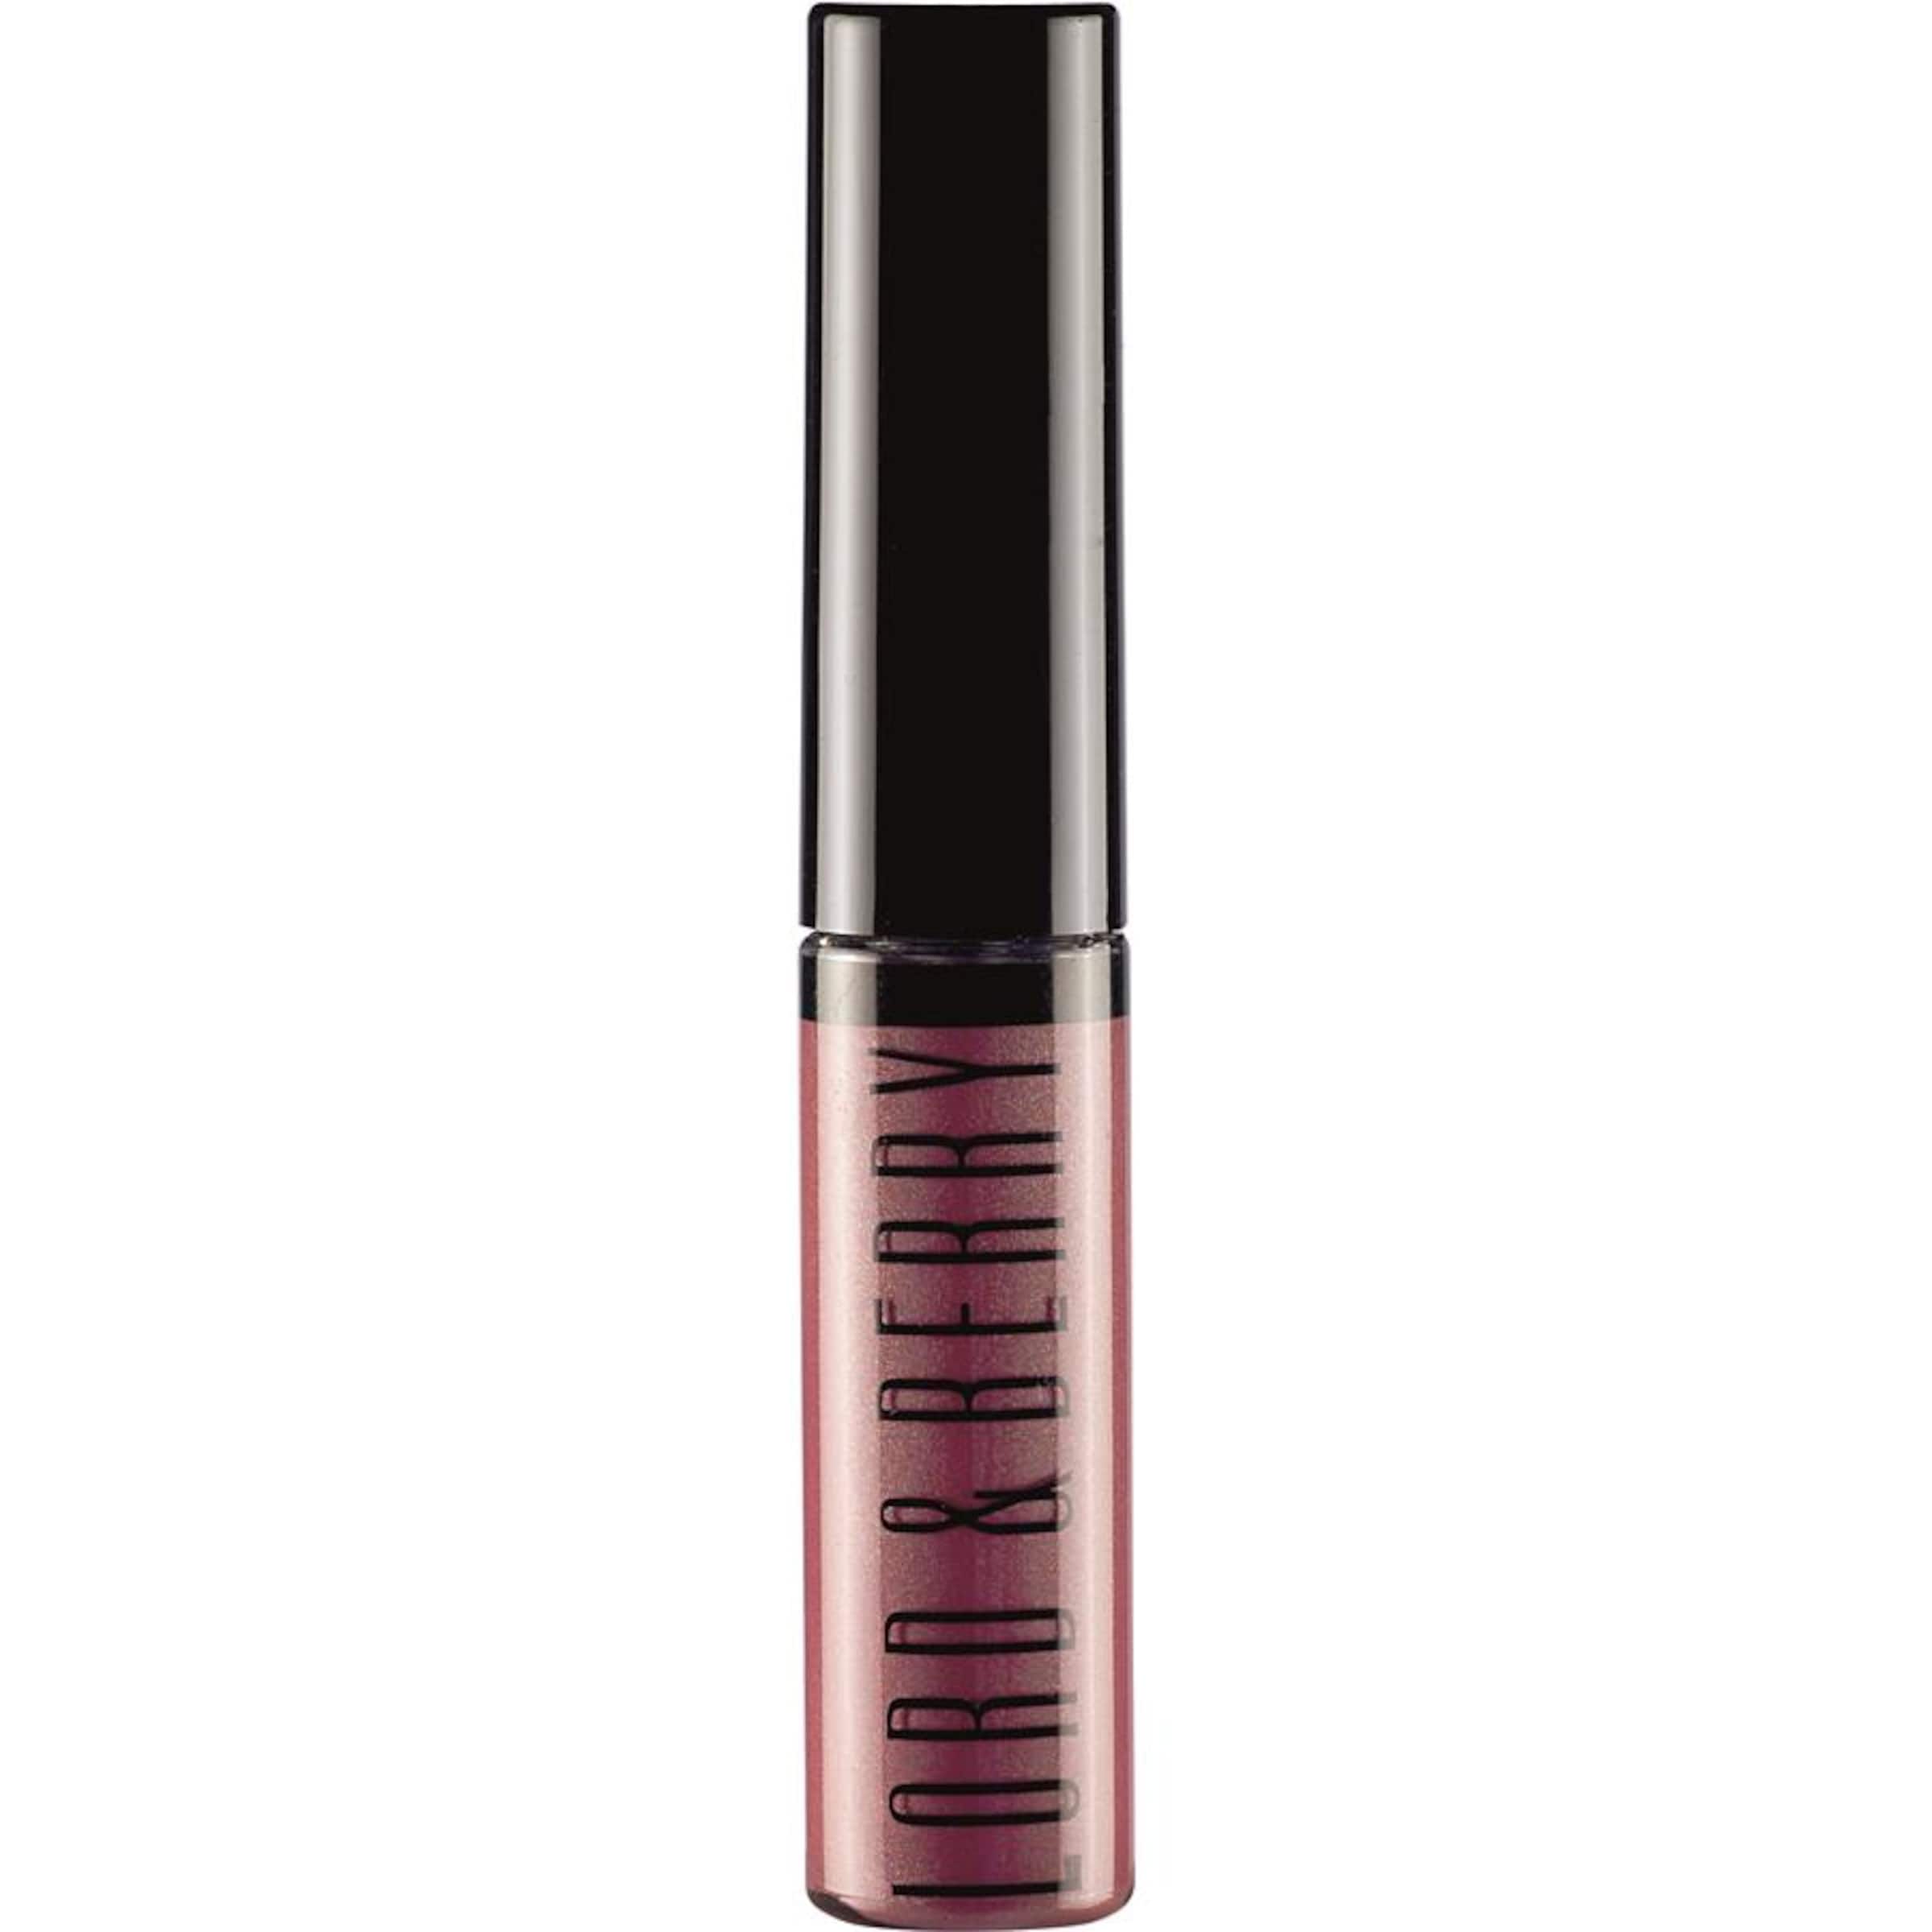 Lord & Berry Lipgloss Skin in Lila 